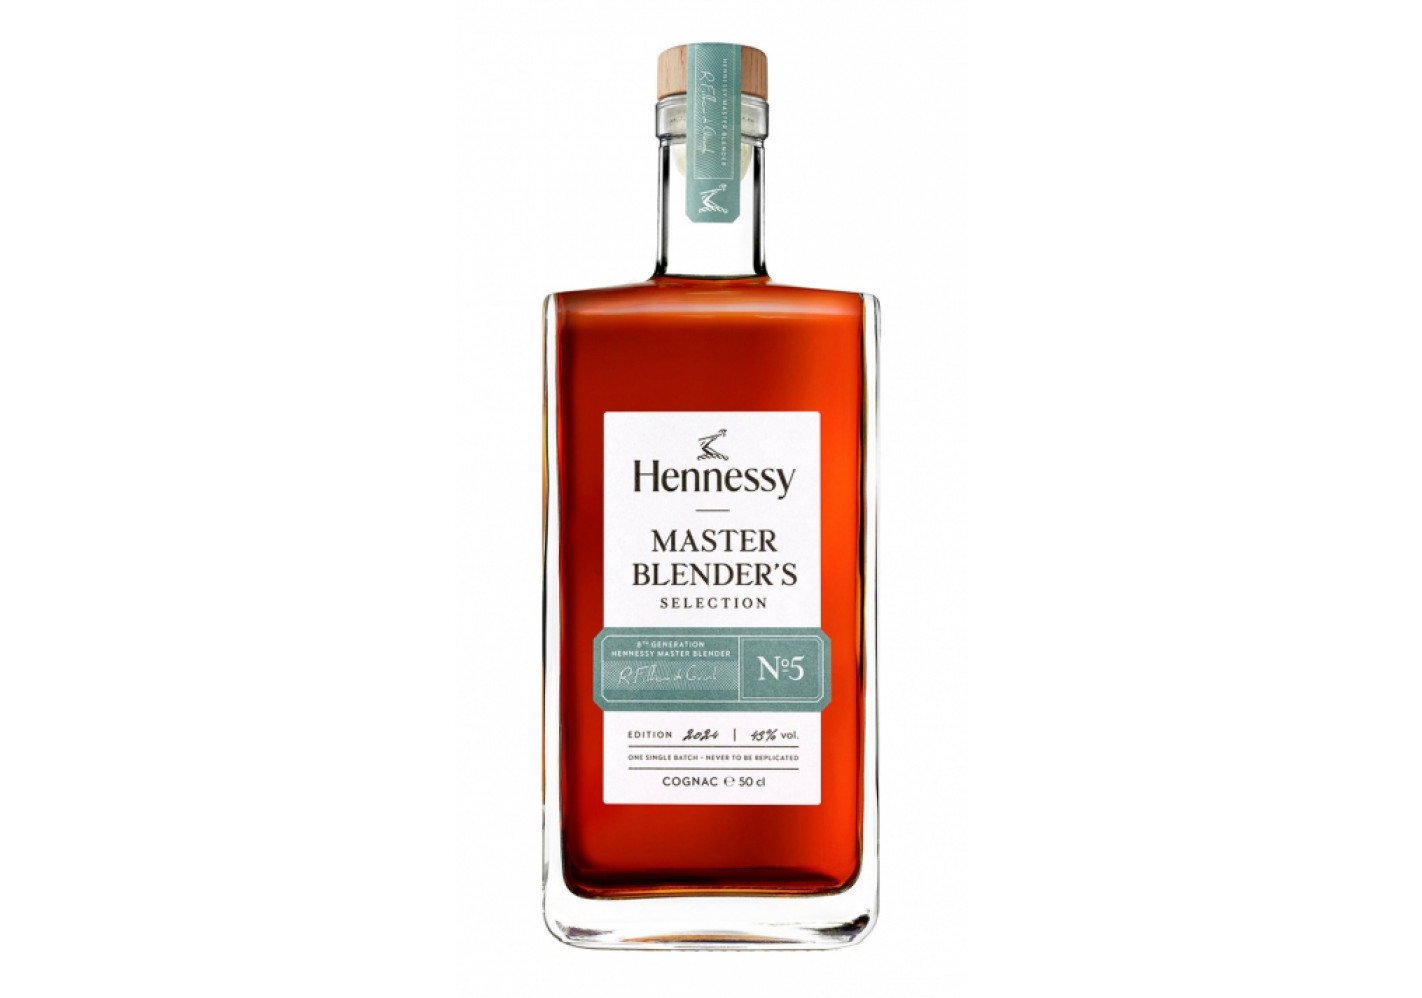 Hennessy Master Blender's Selection No. 5 Limited Edition Cognac 